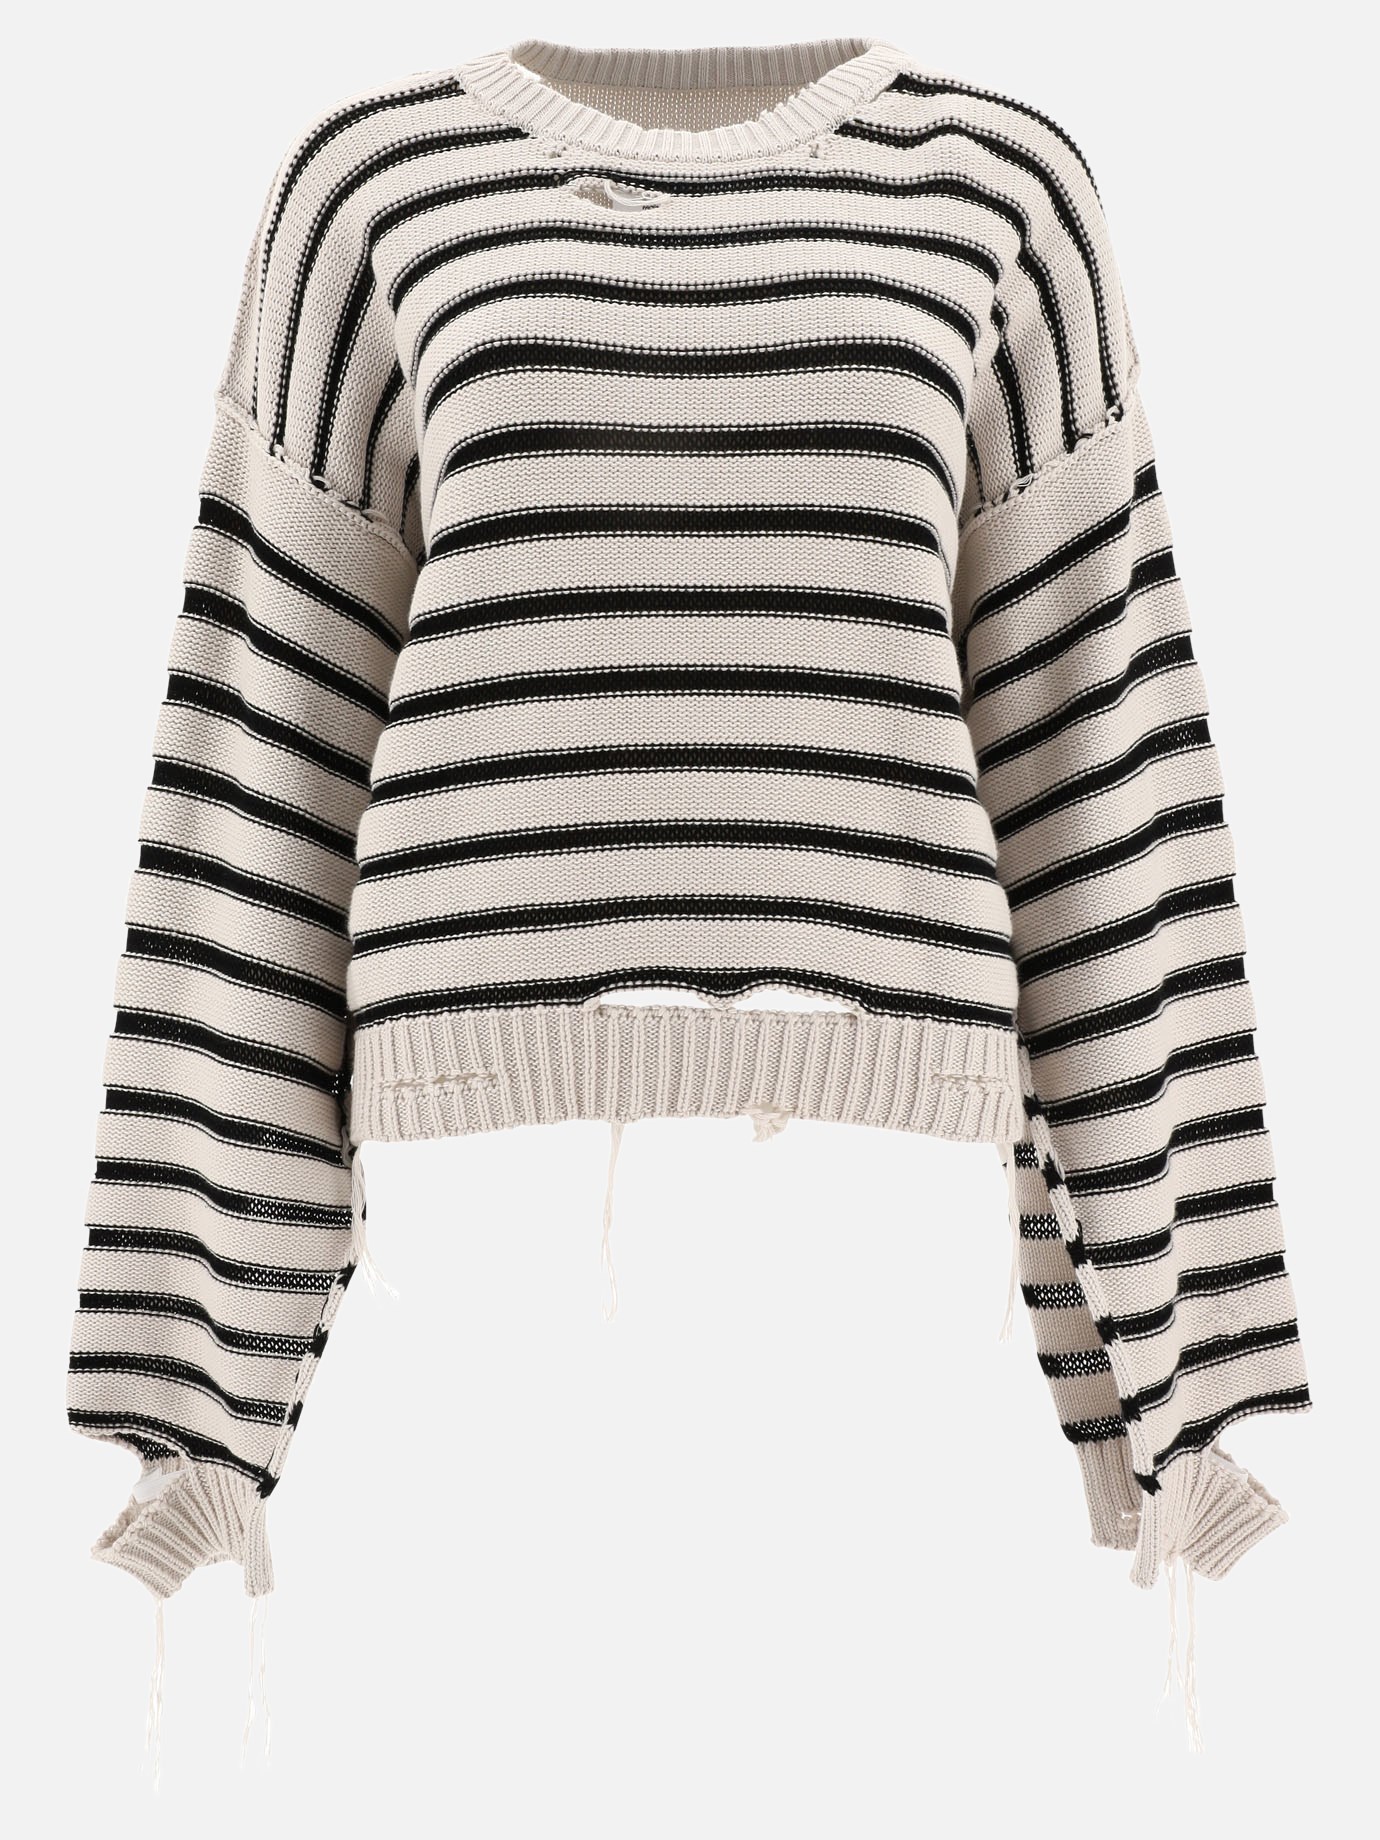 Striped and fringed sweater